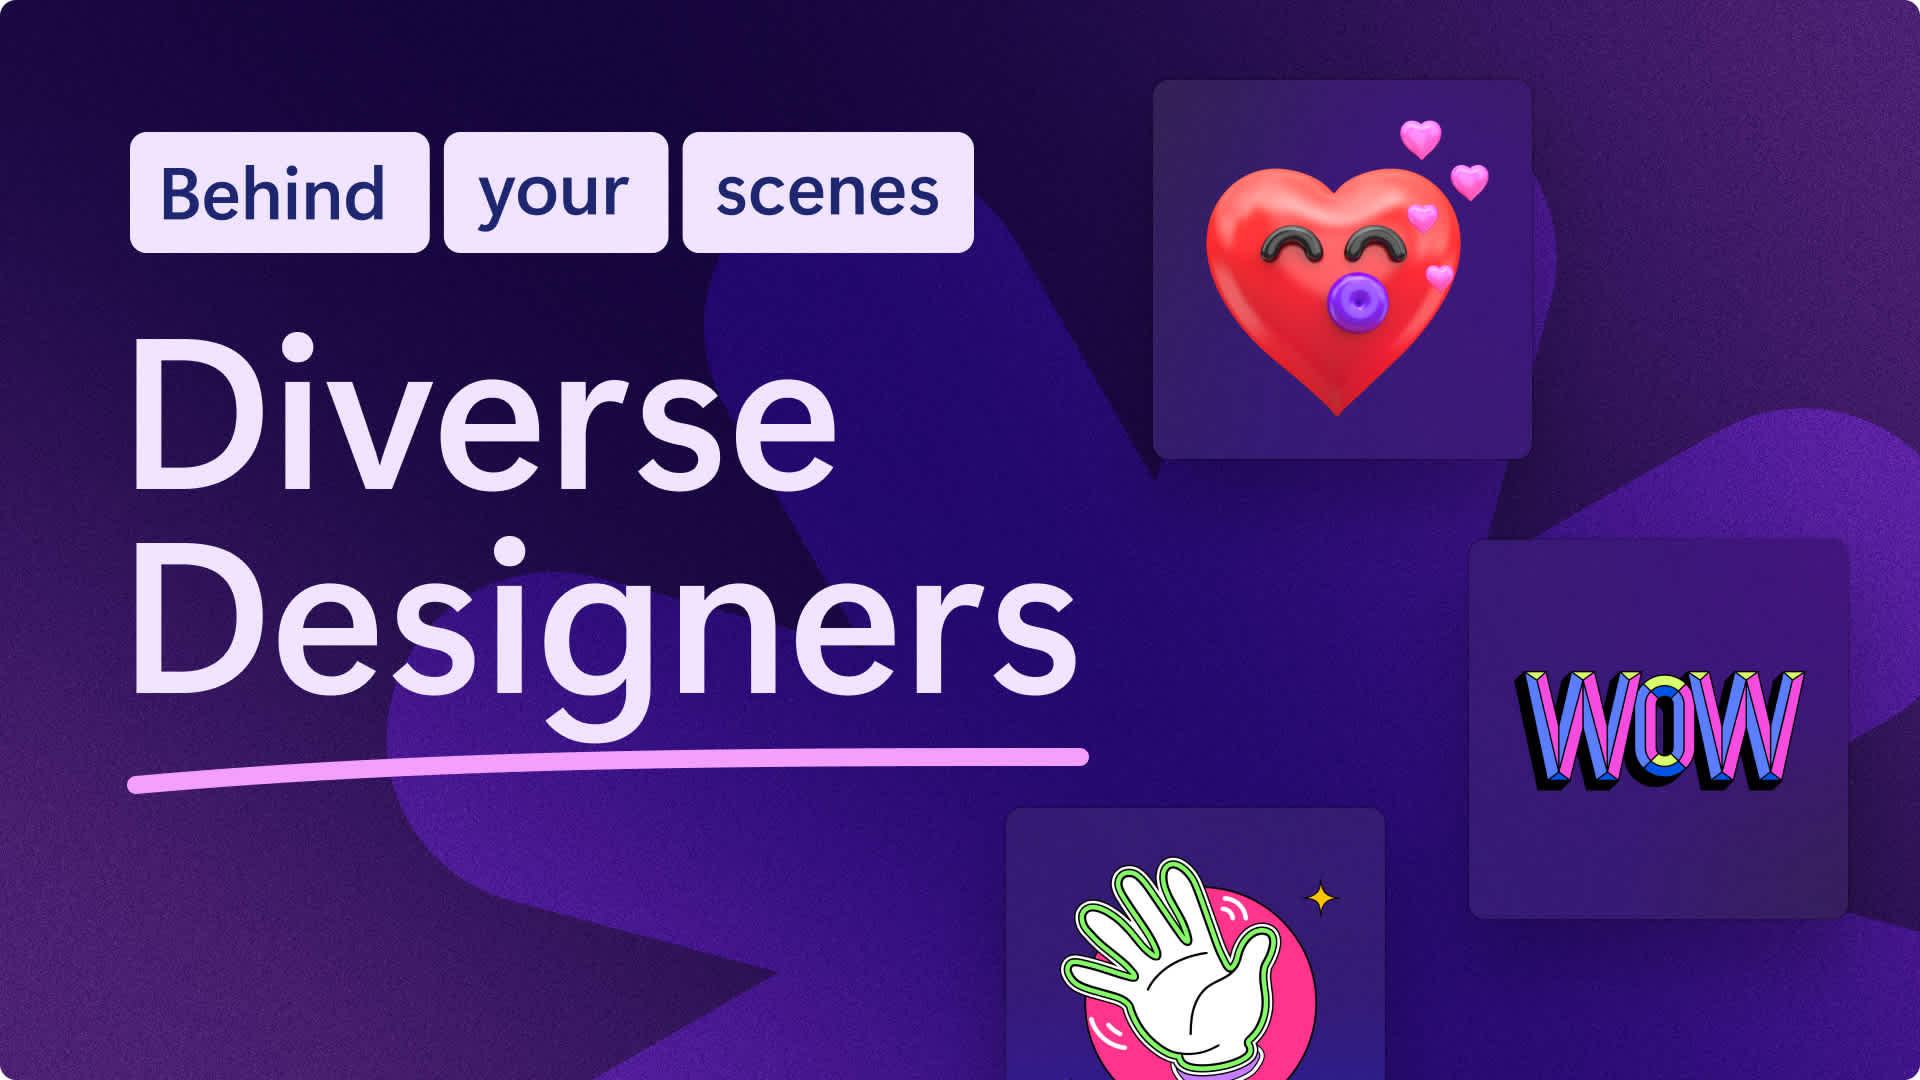 An image of the diverse designers text.